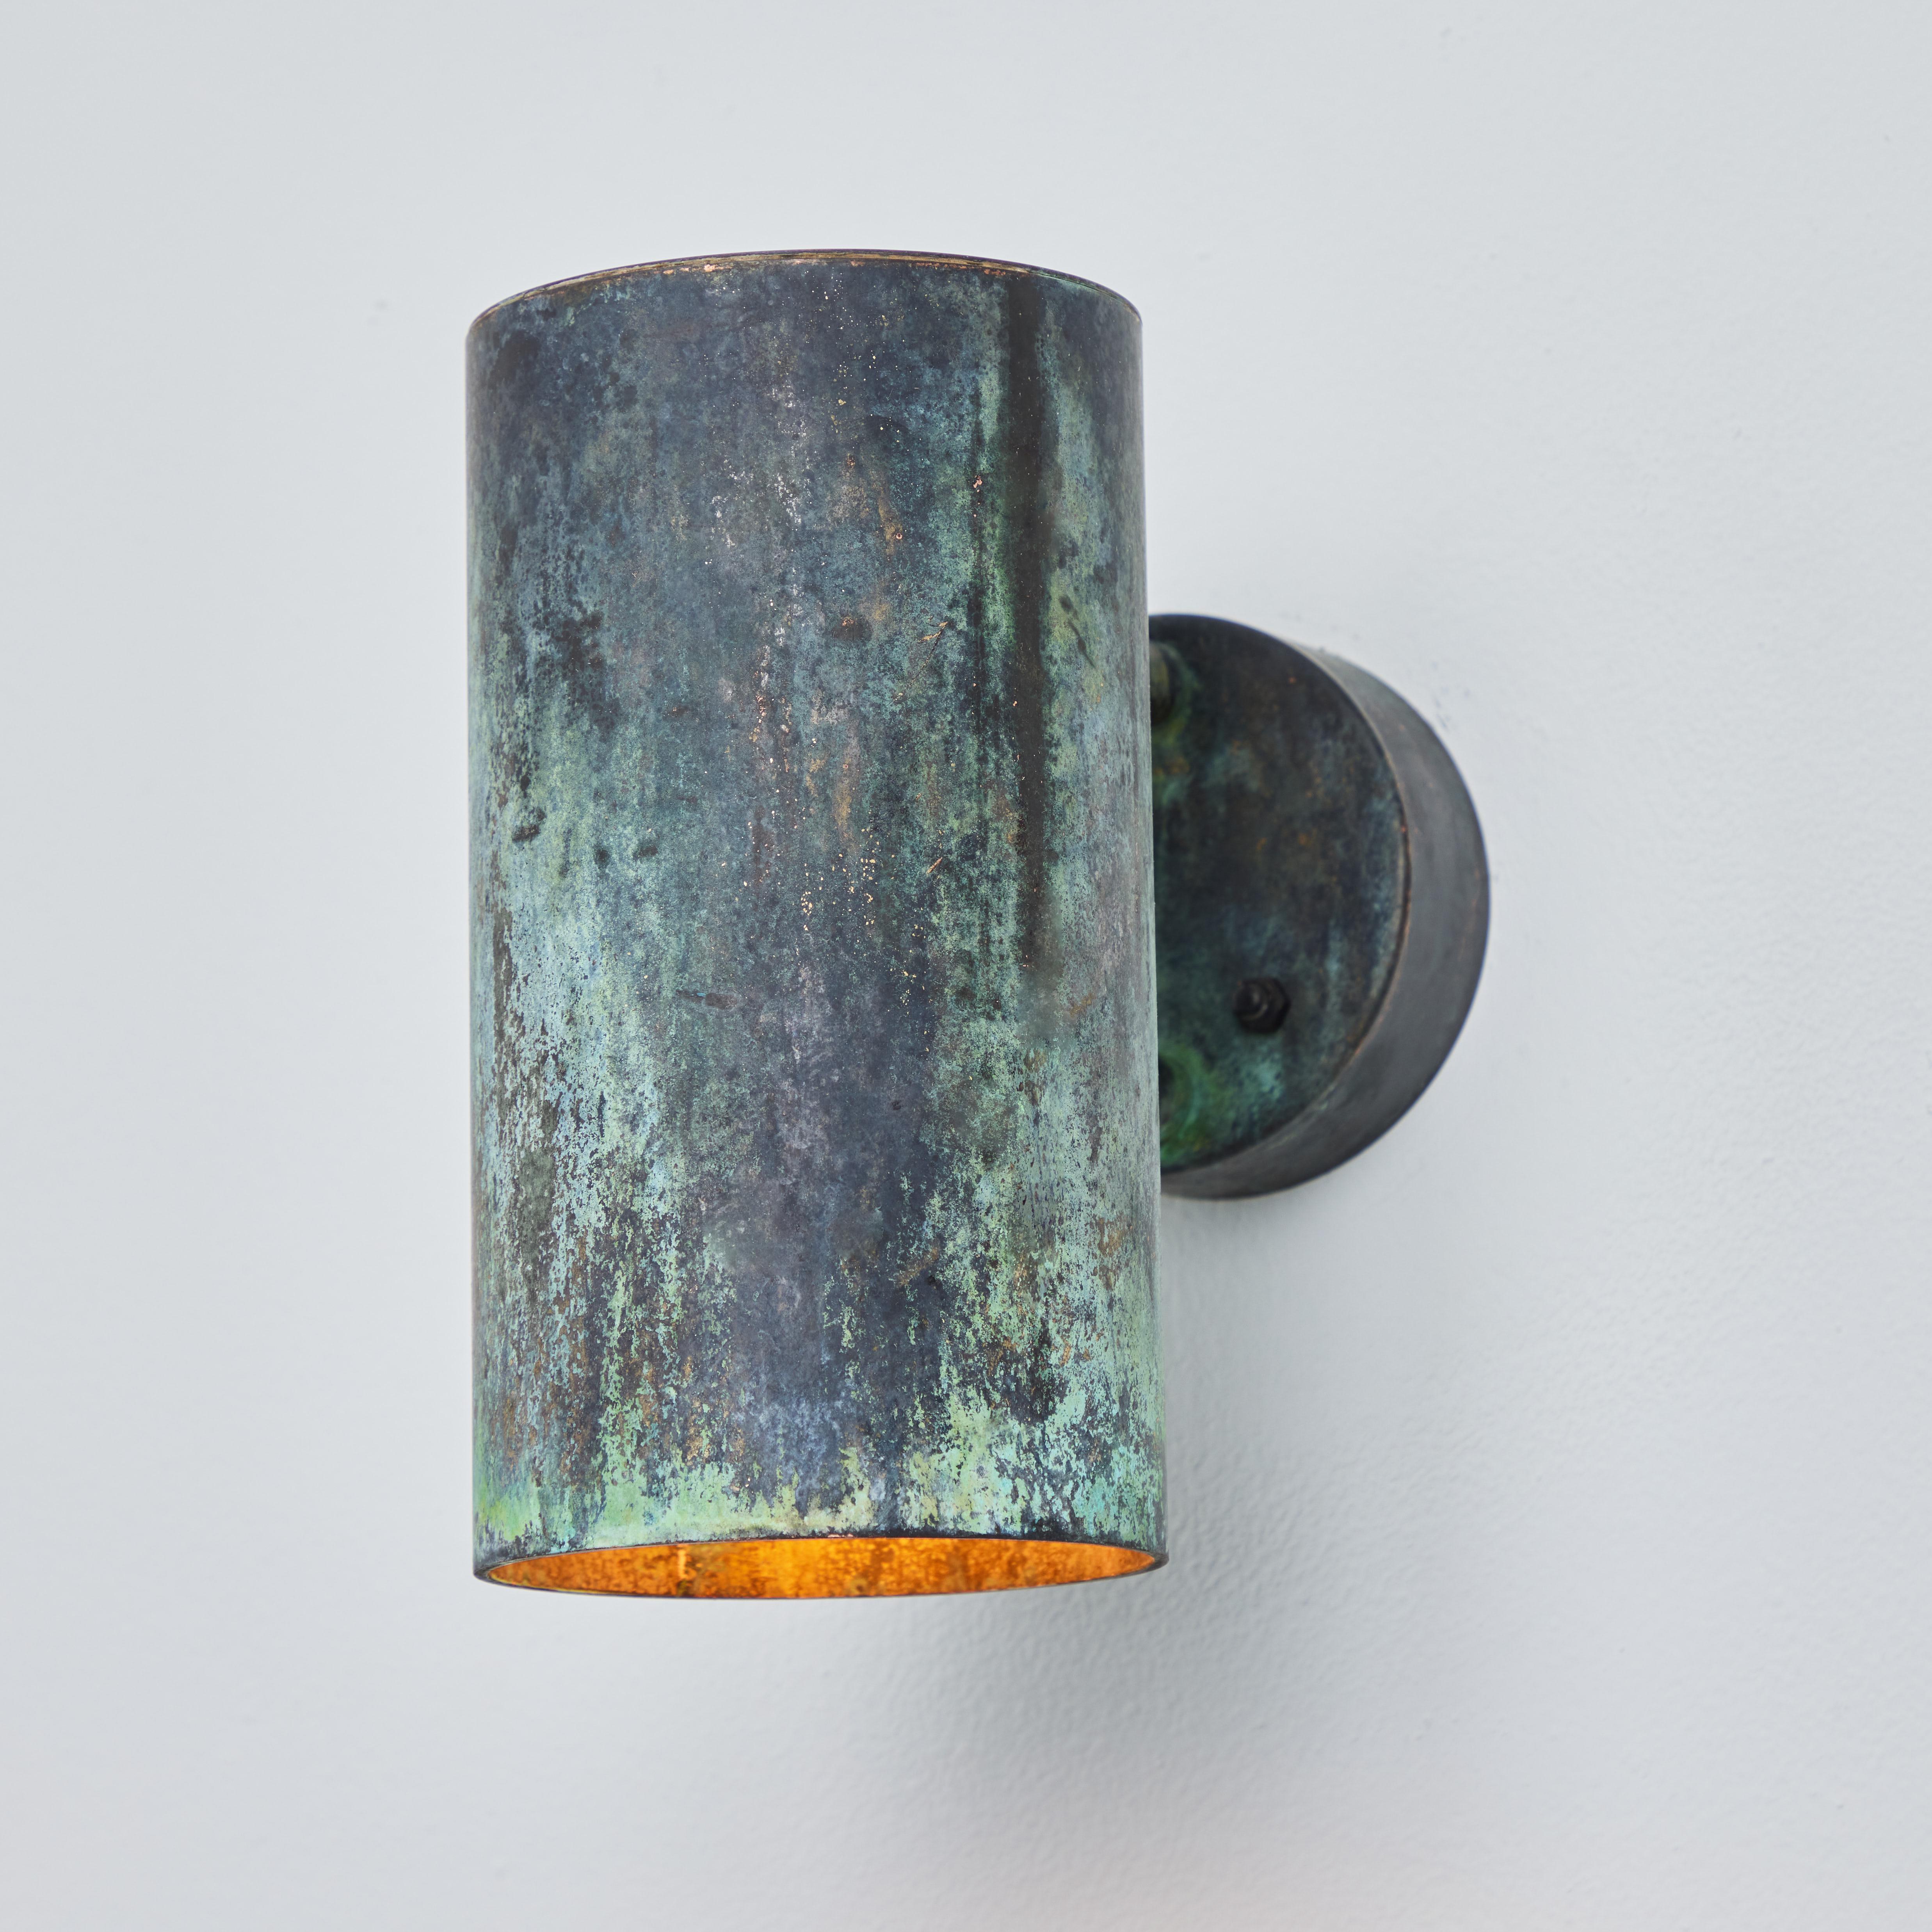 Pair of Hans-Agne Jakobsson C 627/110 'Rulle' darkly patinated outdoor sconces. An exclusive made for U.S. and UL listed authorized re-edition of the classic Swedish design executed in darkly patinated metal with a raw unlacquered metal interior. An